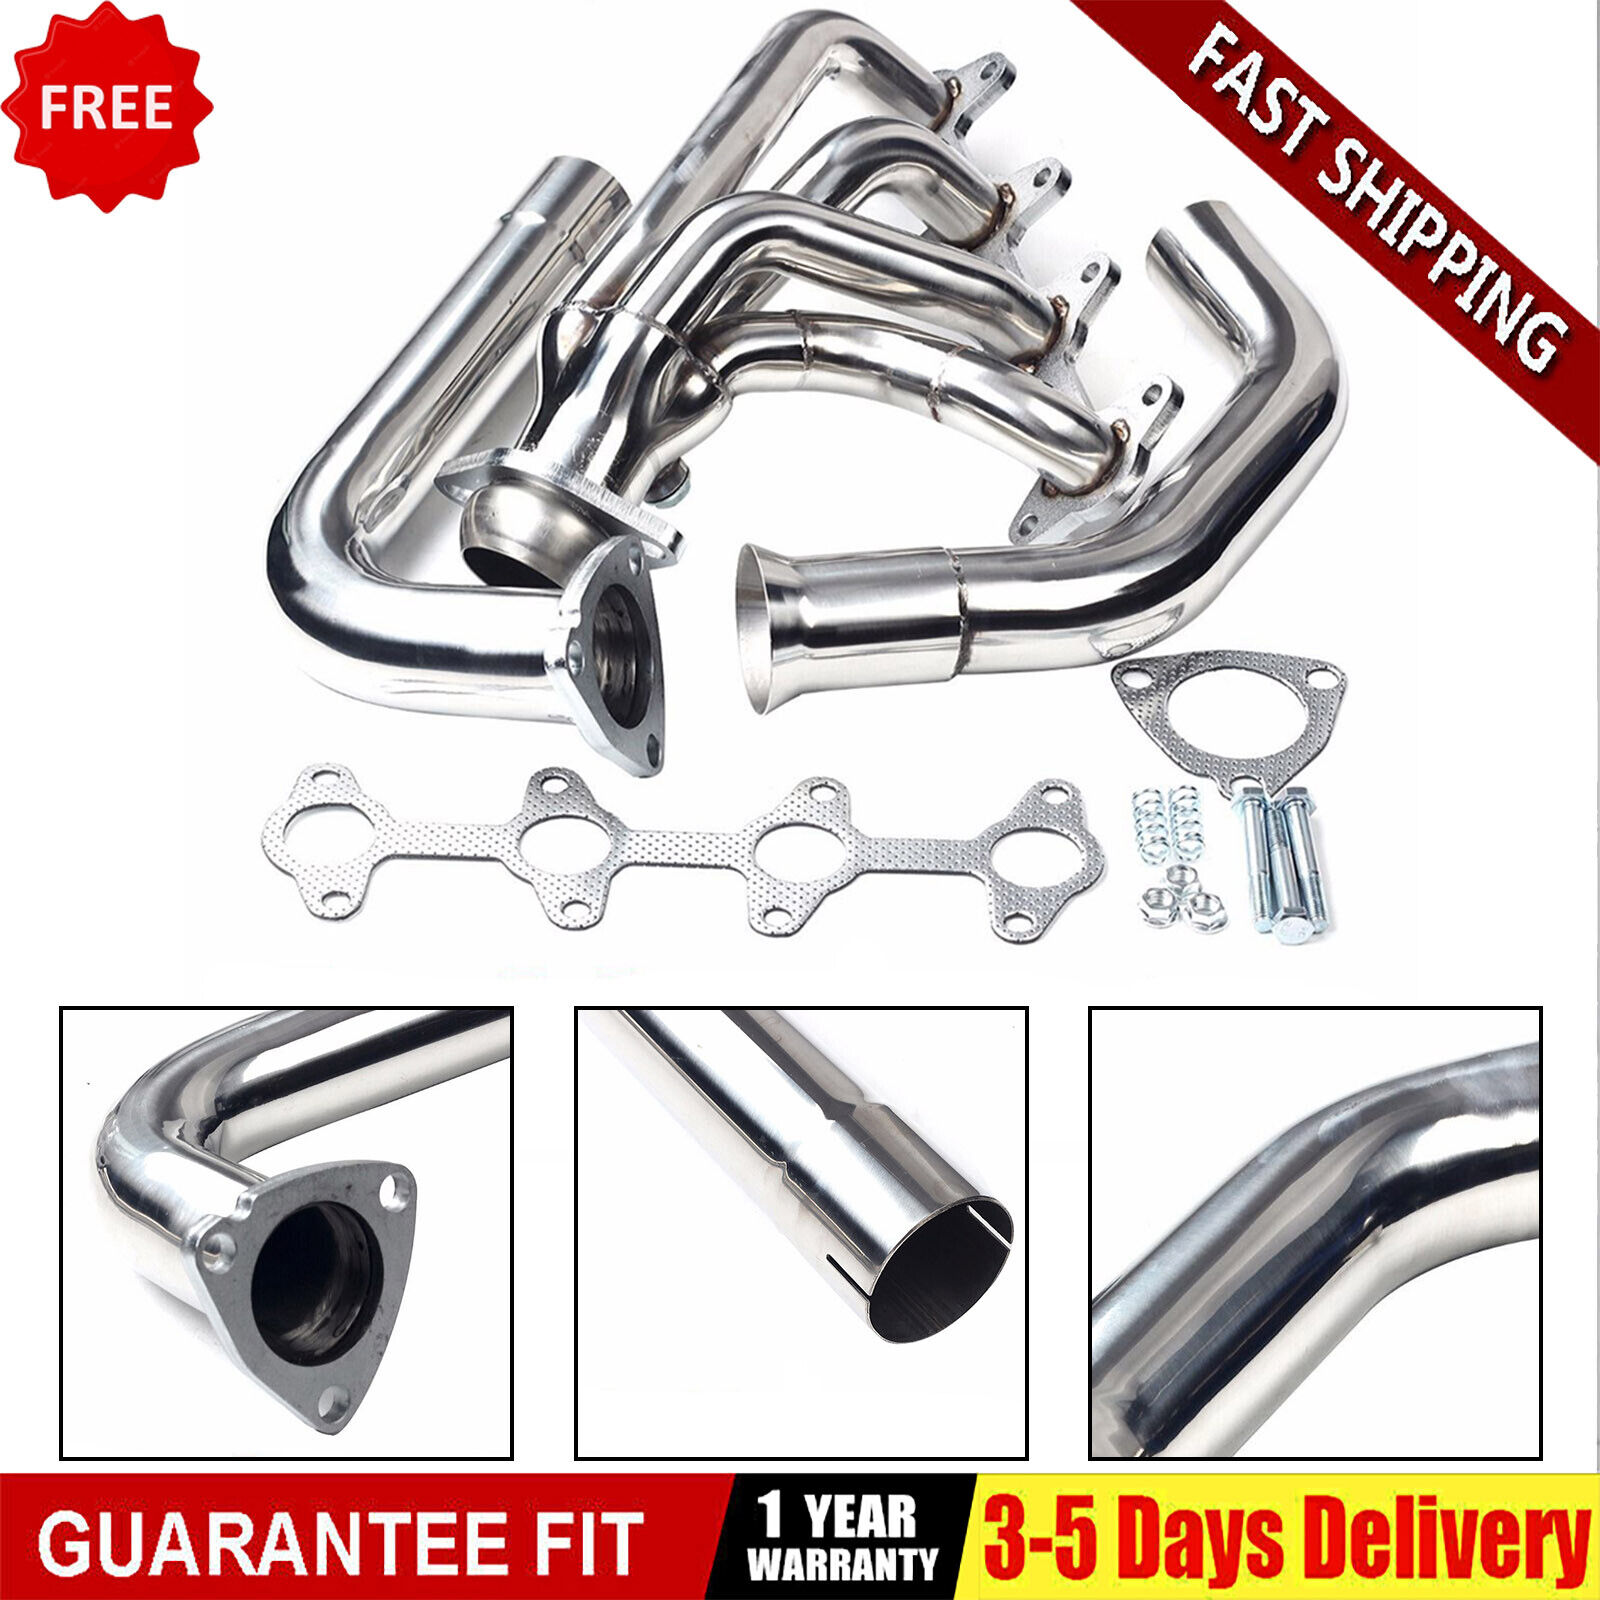 NEW Stainless Exhaust Header Kit For Chevy S10 94-04 &GMC Sonoma 2.2L 2WD Pickup